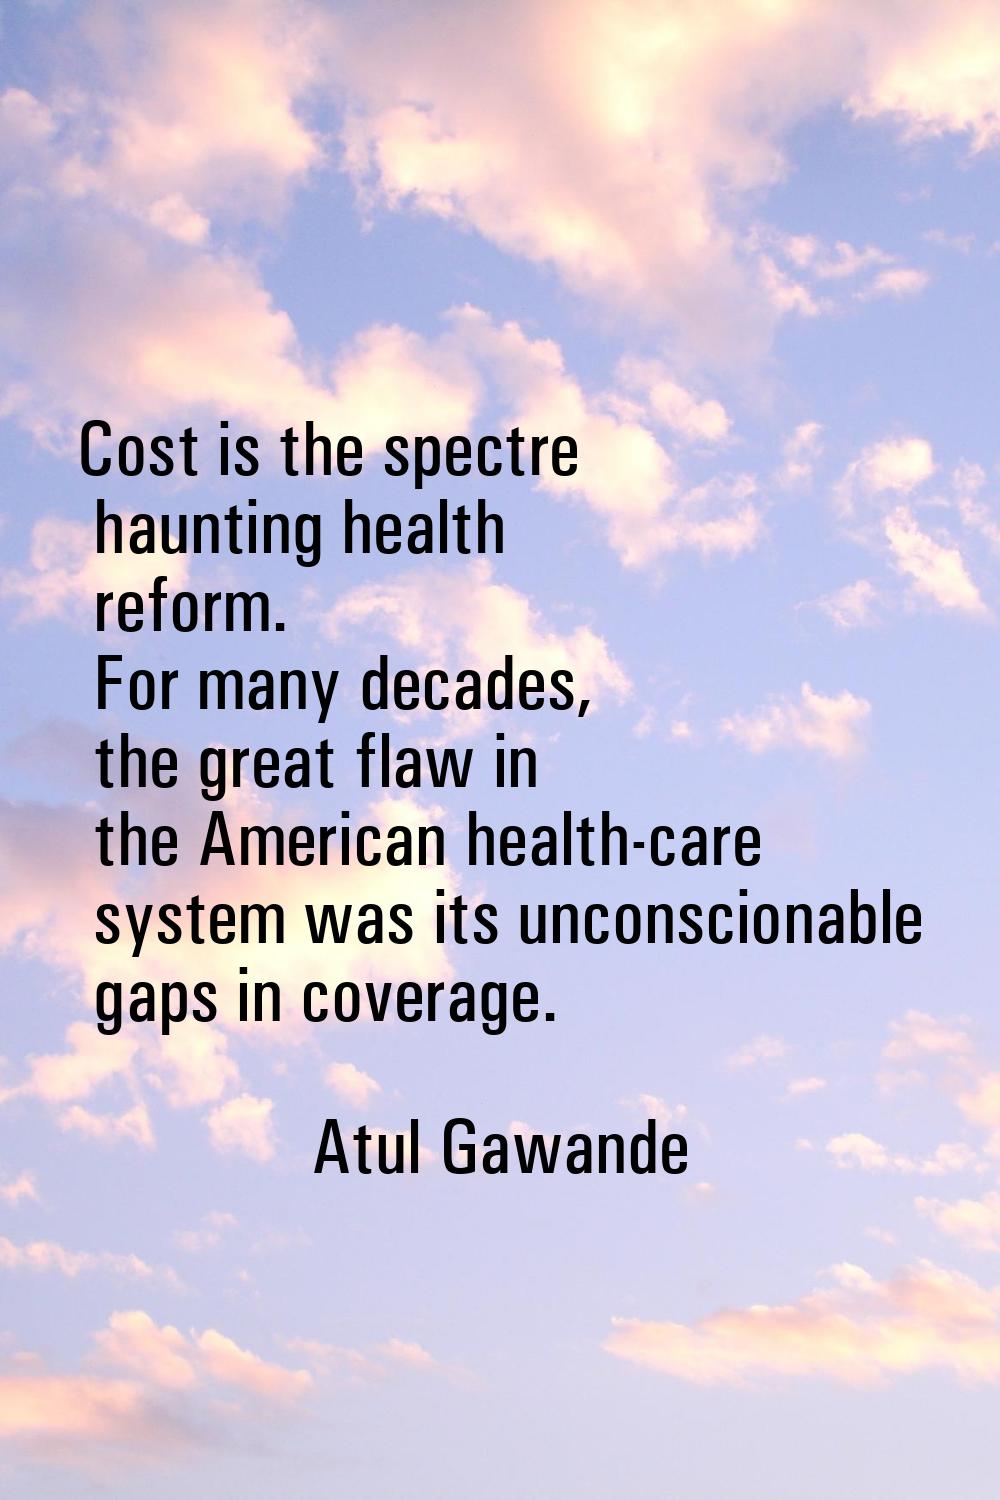 Cost is the spectre haunting health reform. For many decades, the great flaw in the American health